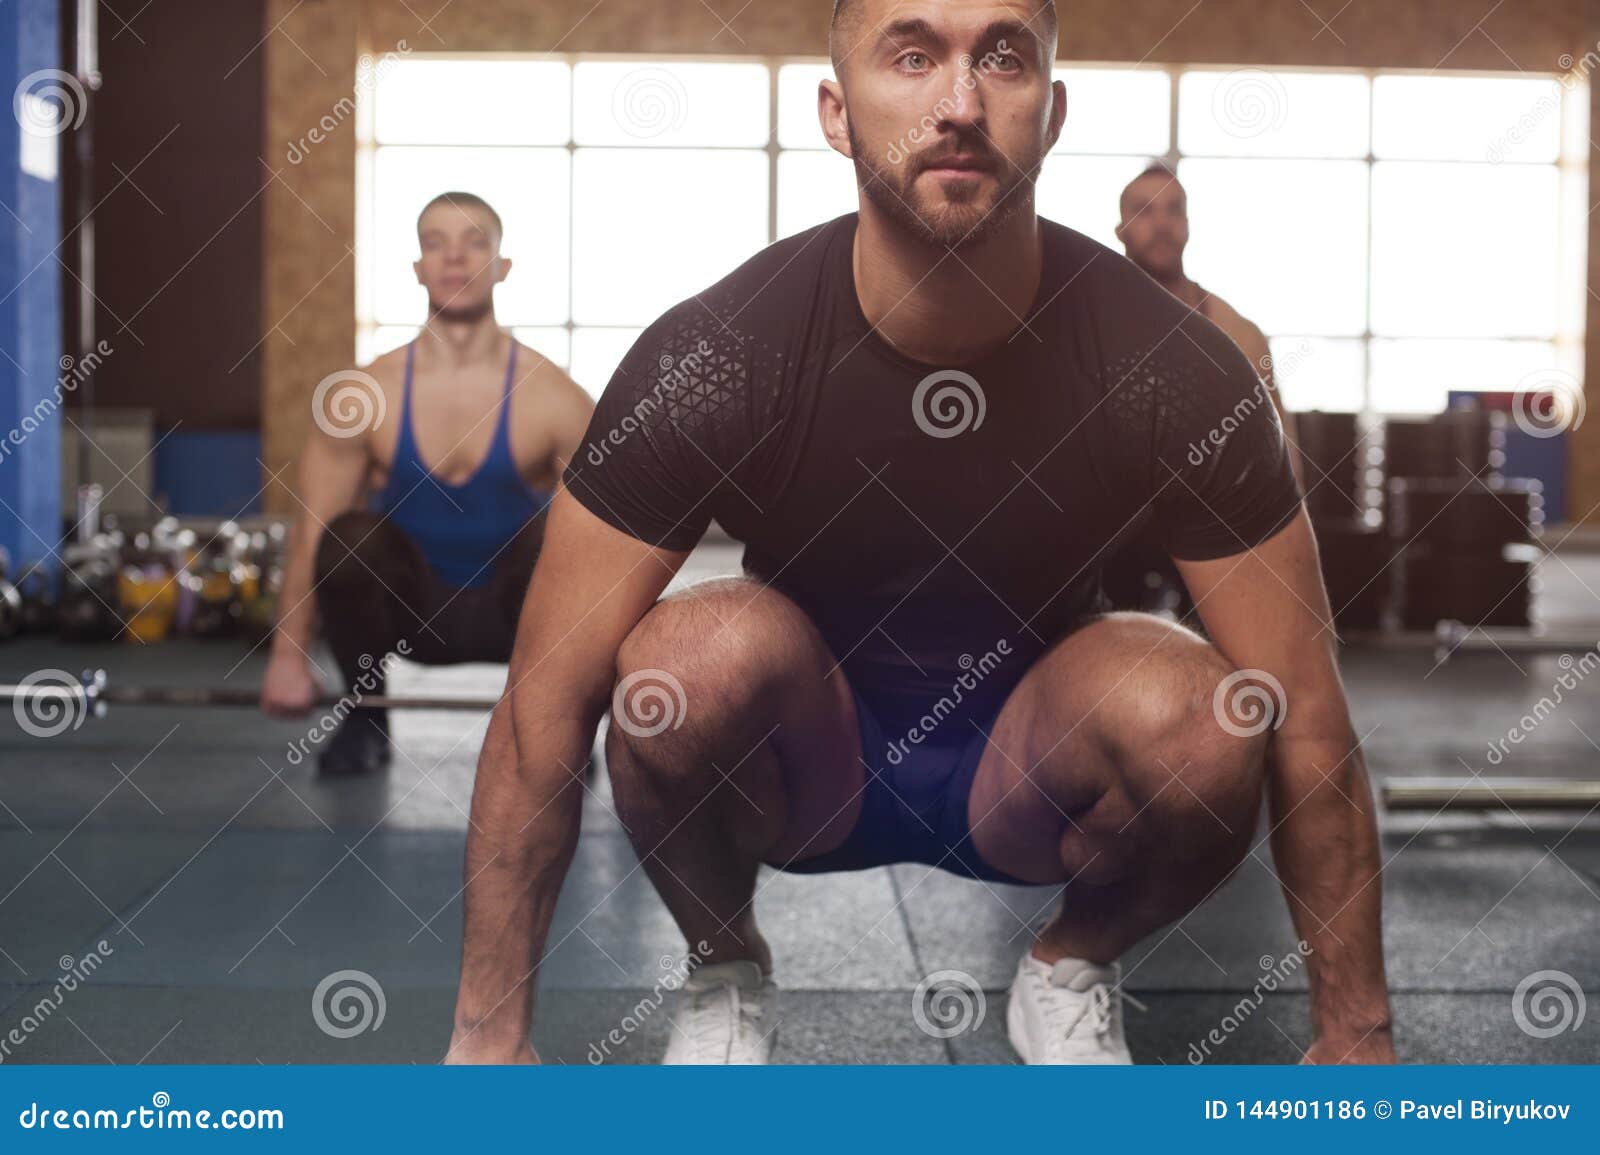 Group Of Sporty Athletic Men Training With Barbells. Stock Photo - Image of  athletic, endurance: 144901186